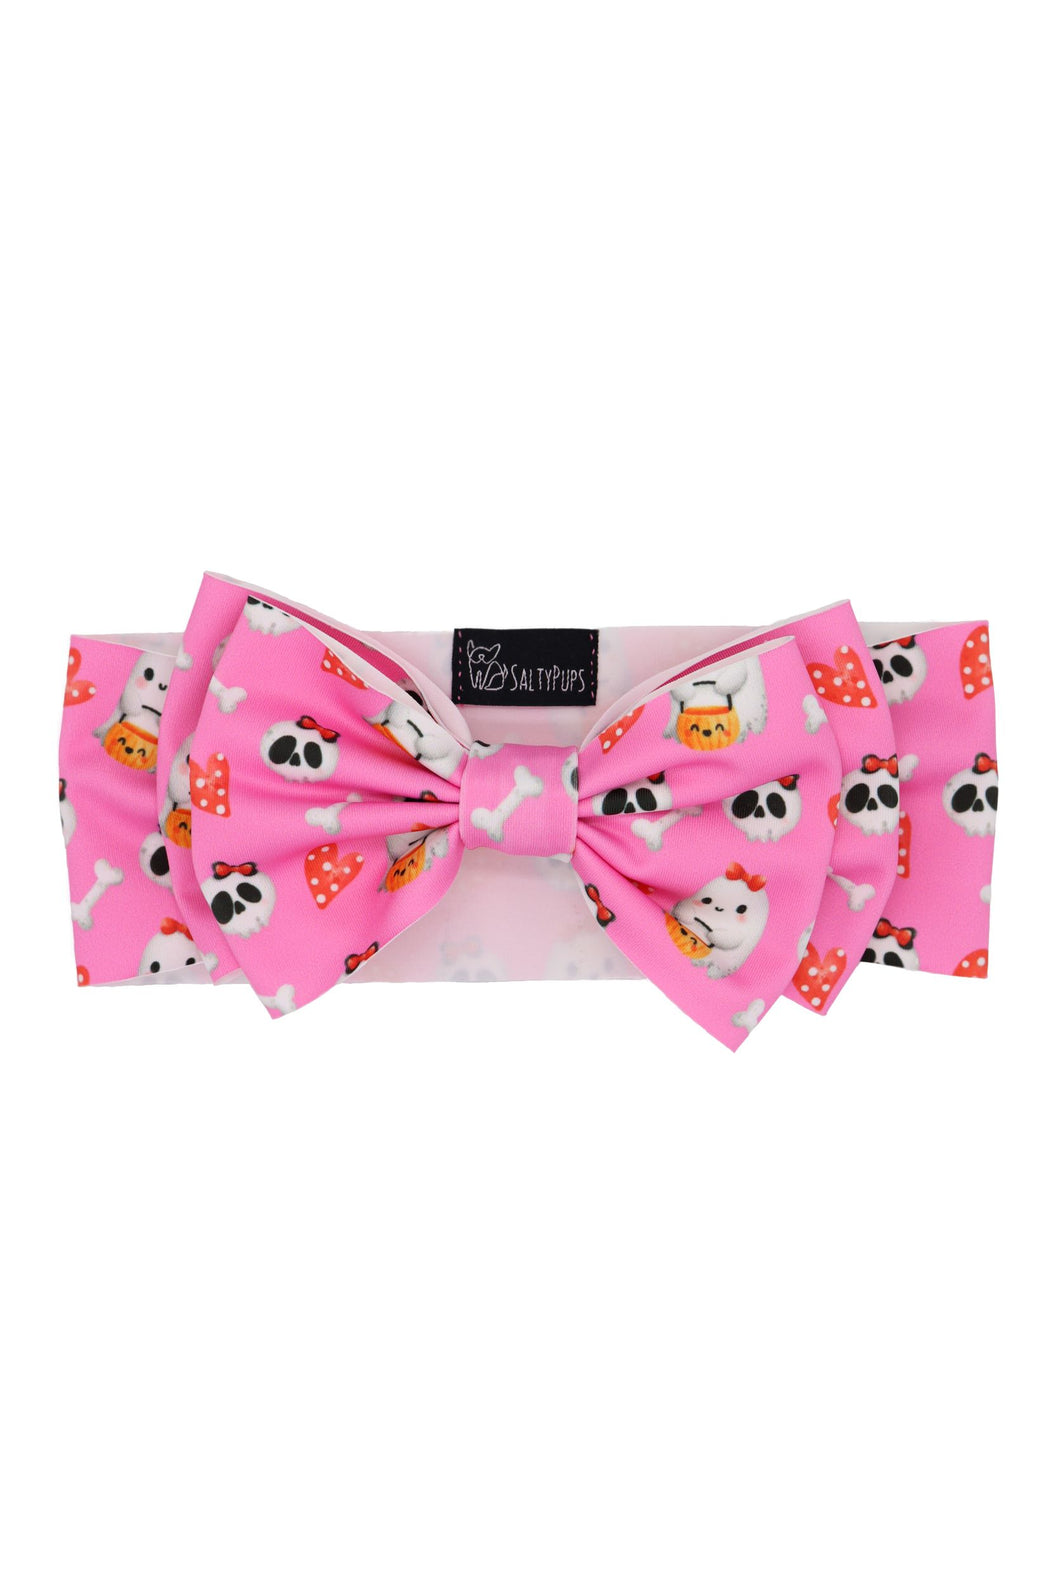 Bow Headbands - Too Cute to Spook!